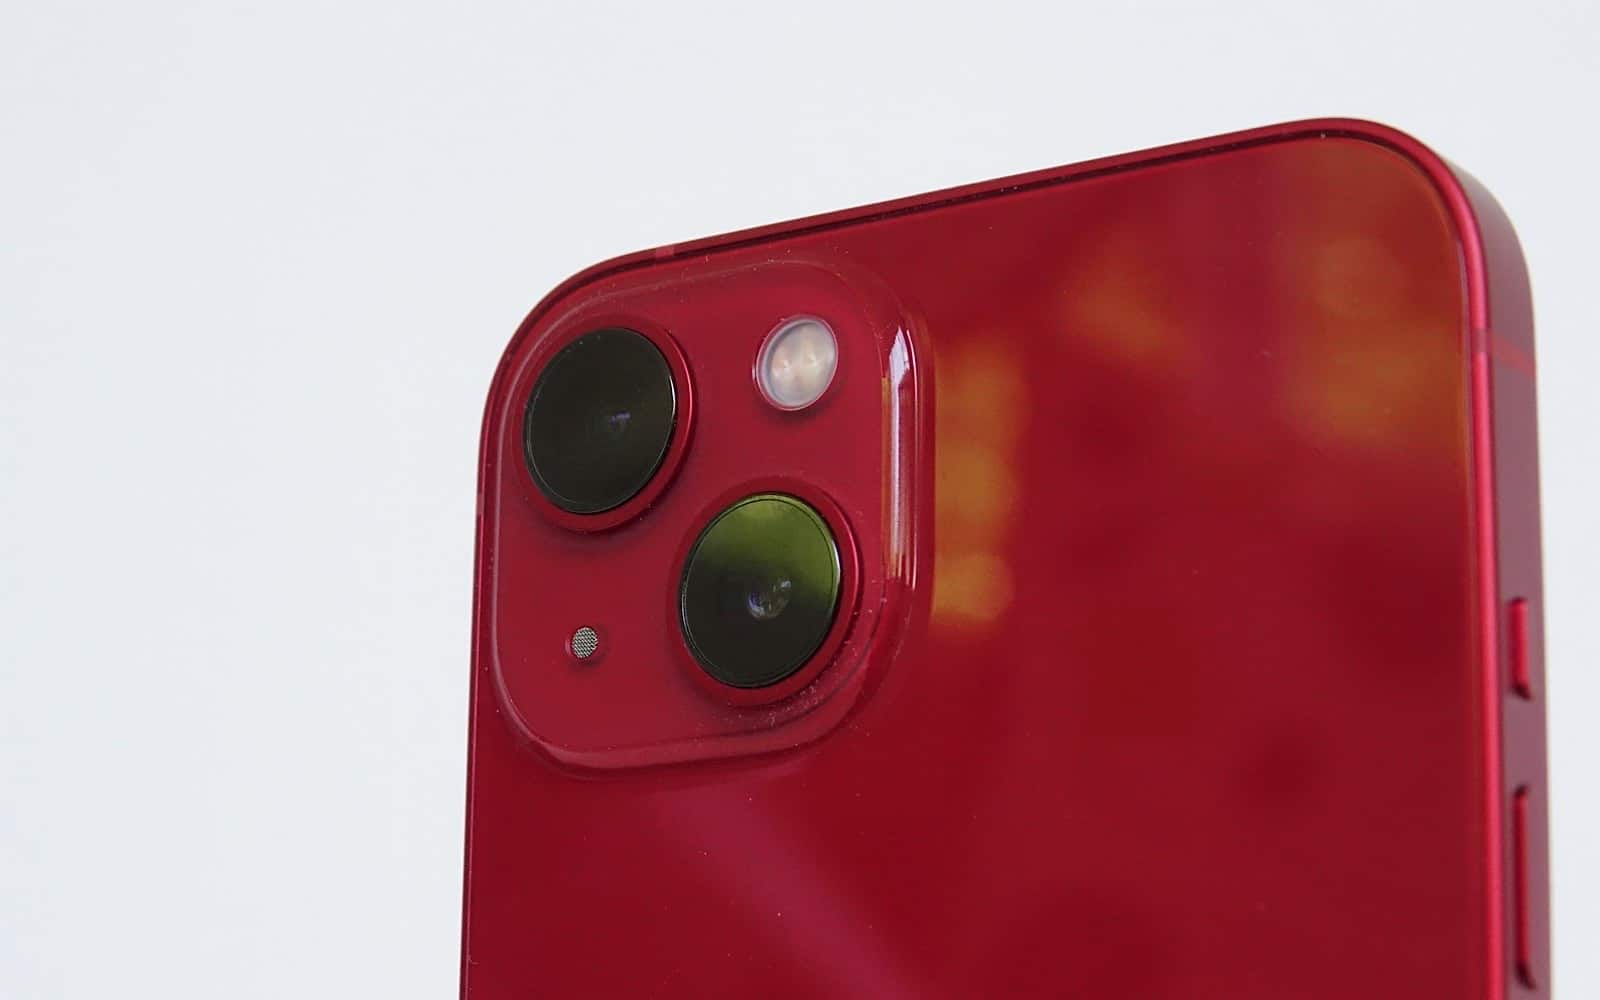 The dual cameras on the back of the iPhone 13